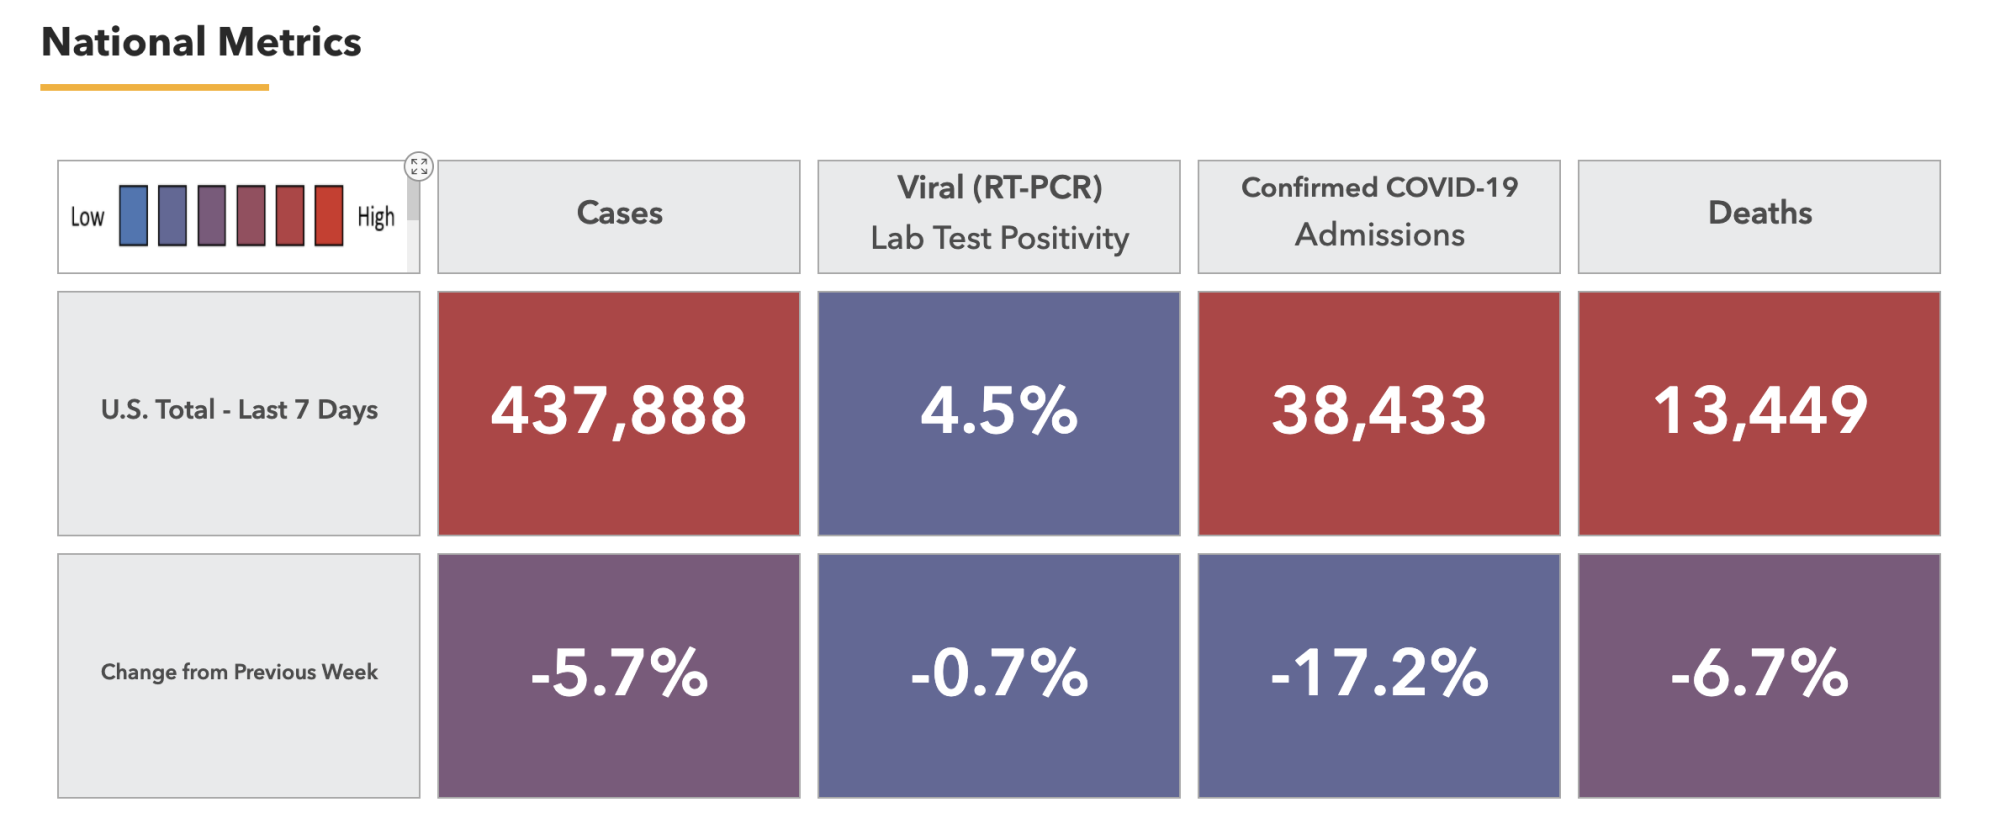 HHS Protect topline metrics, presented as a color-coded table and including cases, test positivity, confirmed COVID-19 hospital admissions, and deaths, along with a 